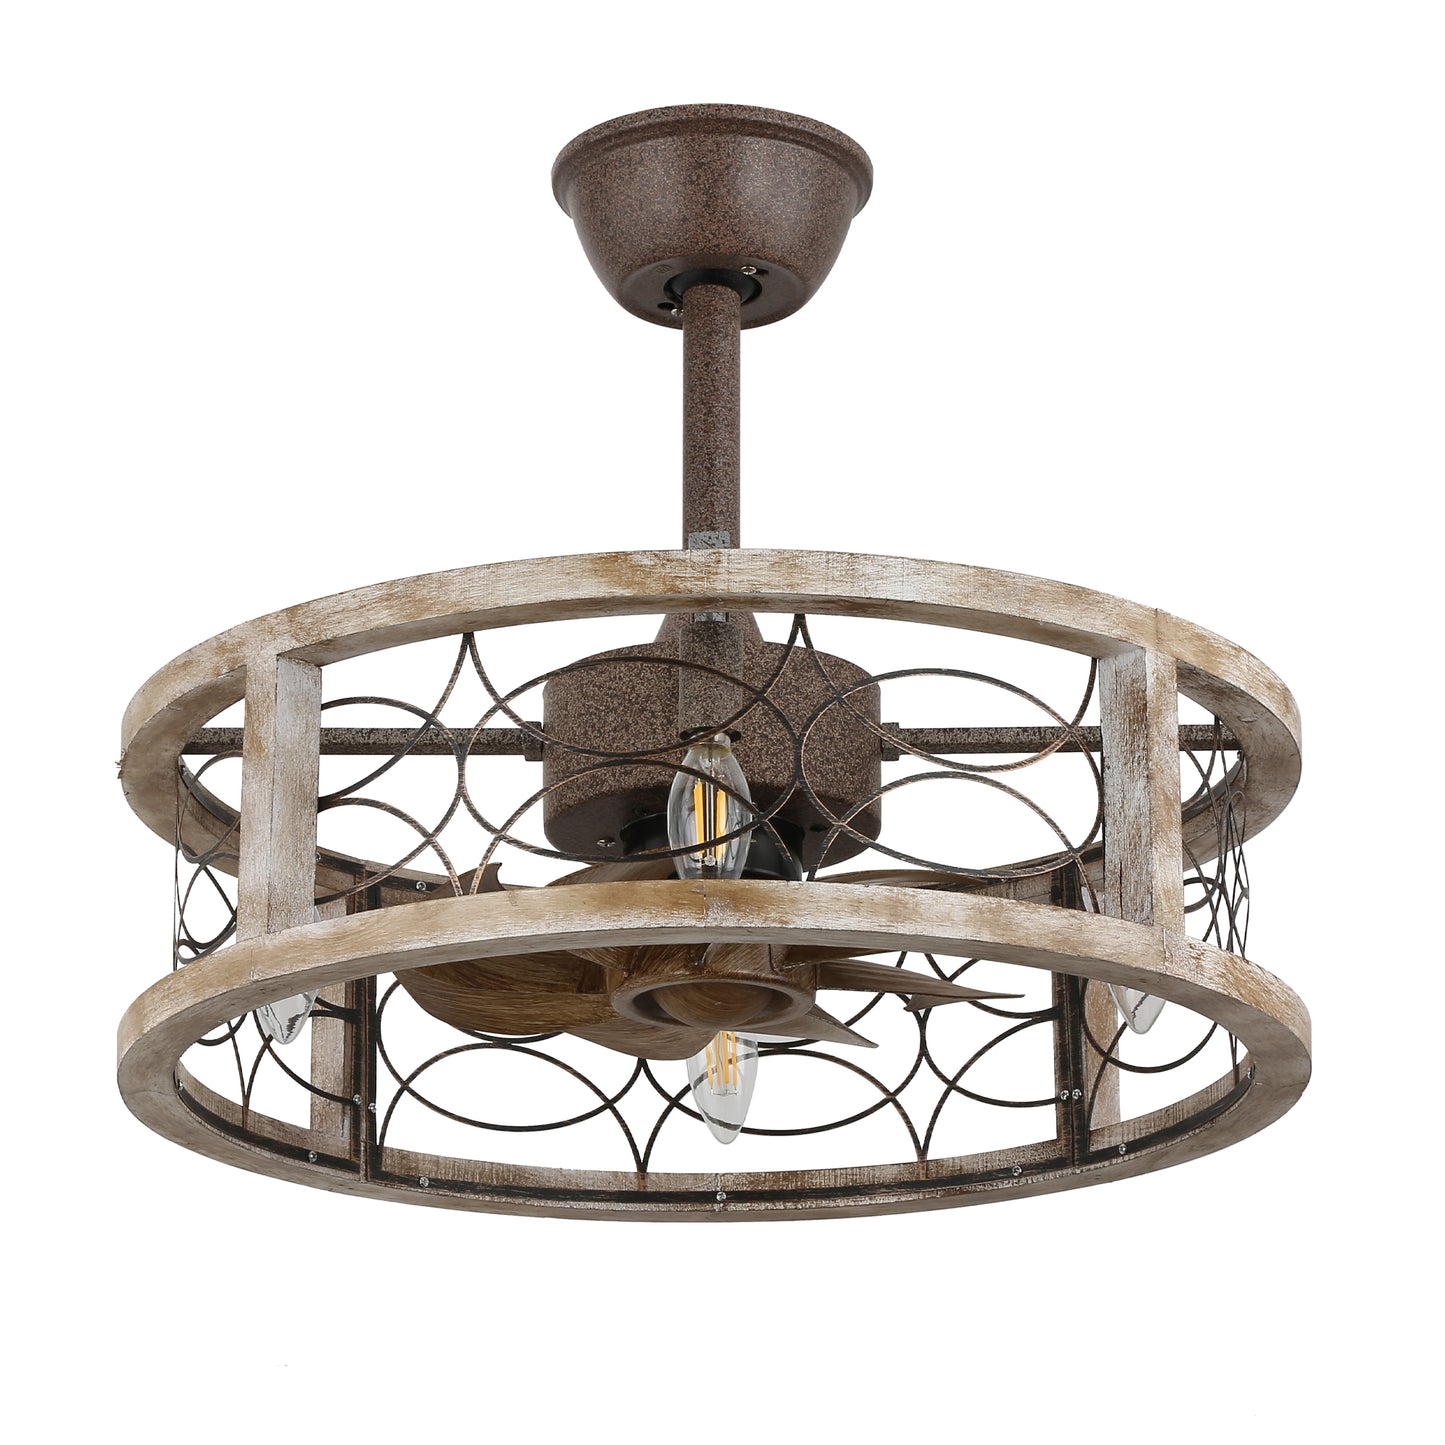 18 in. Farmhouse 4-Light Distressed Wooden Chic Ceiling Fan with Lights and Remote